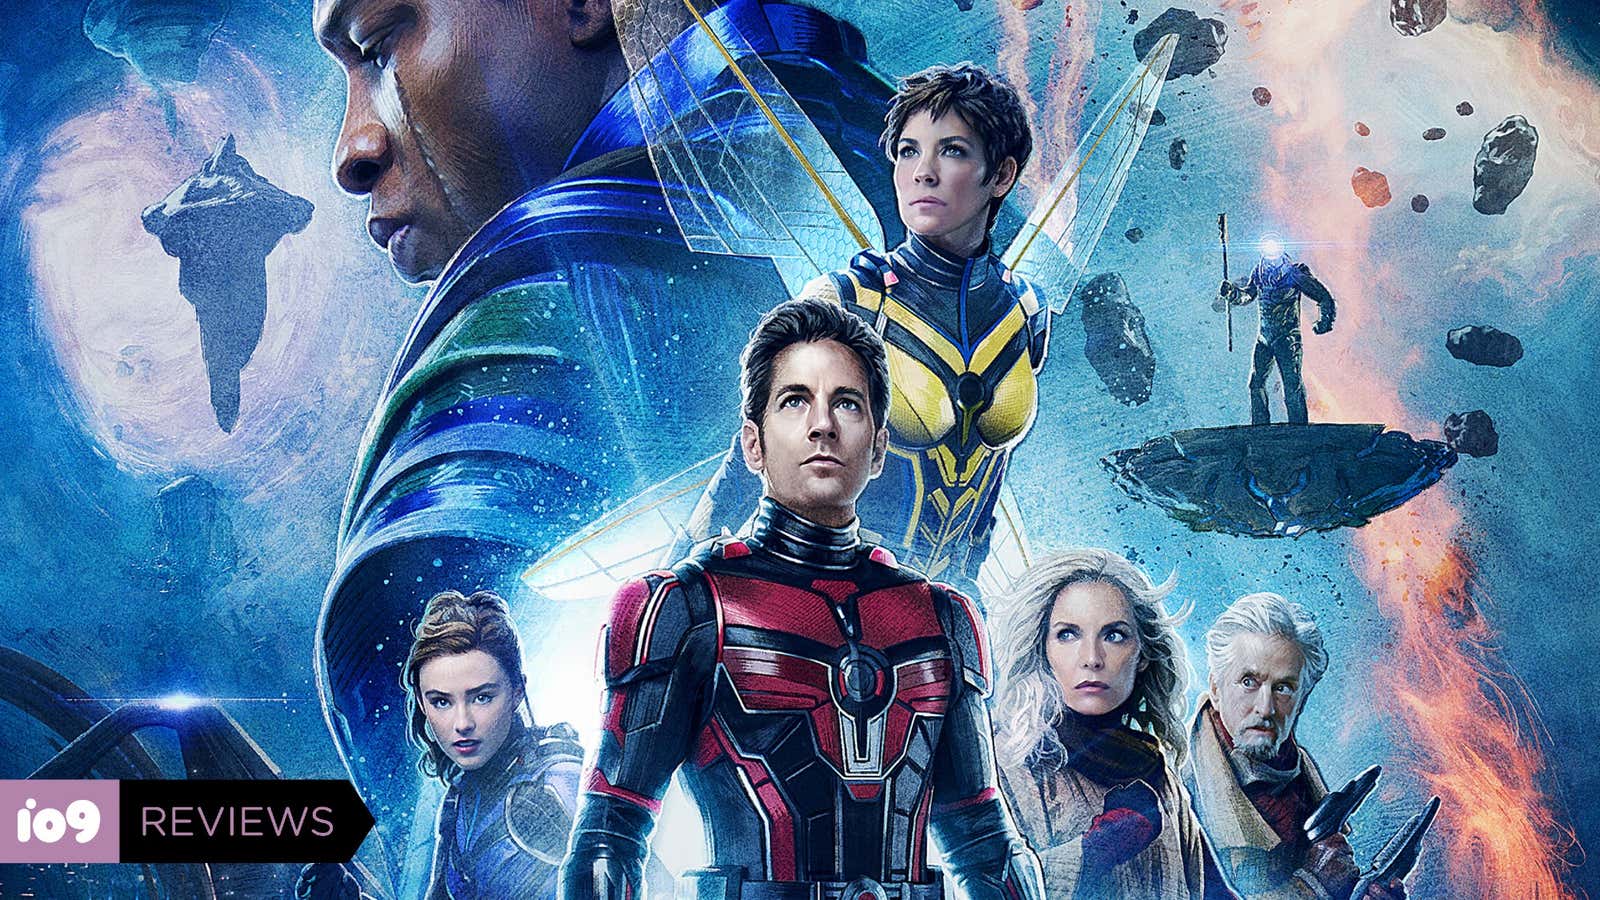 Antman and the wasp: Quantumania (2023). Could anyone make it a